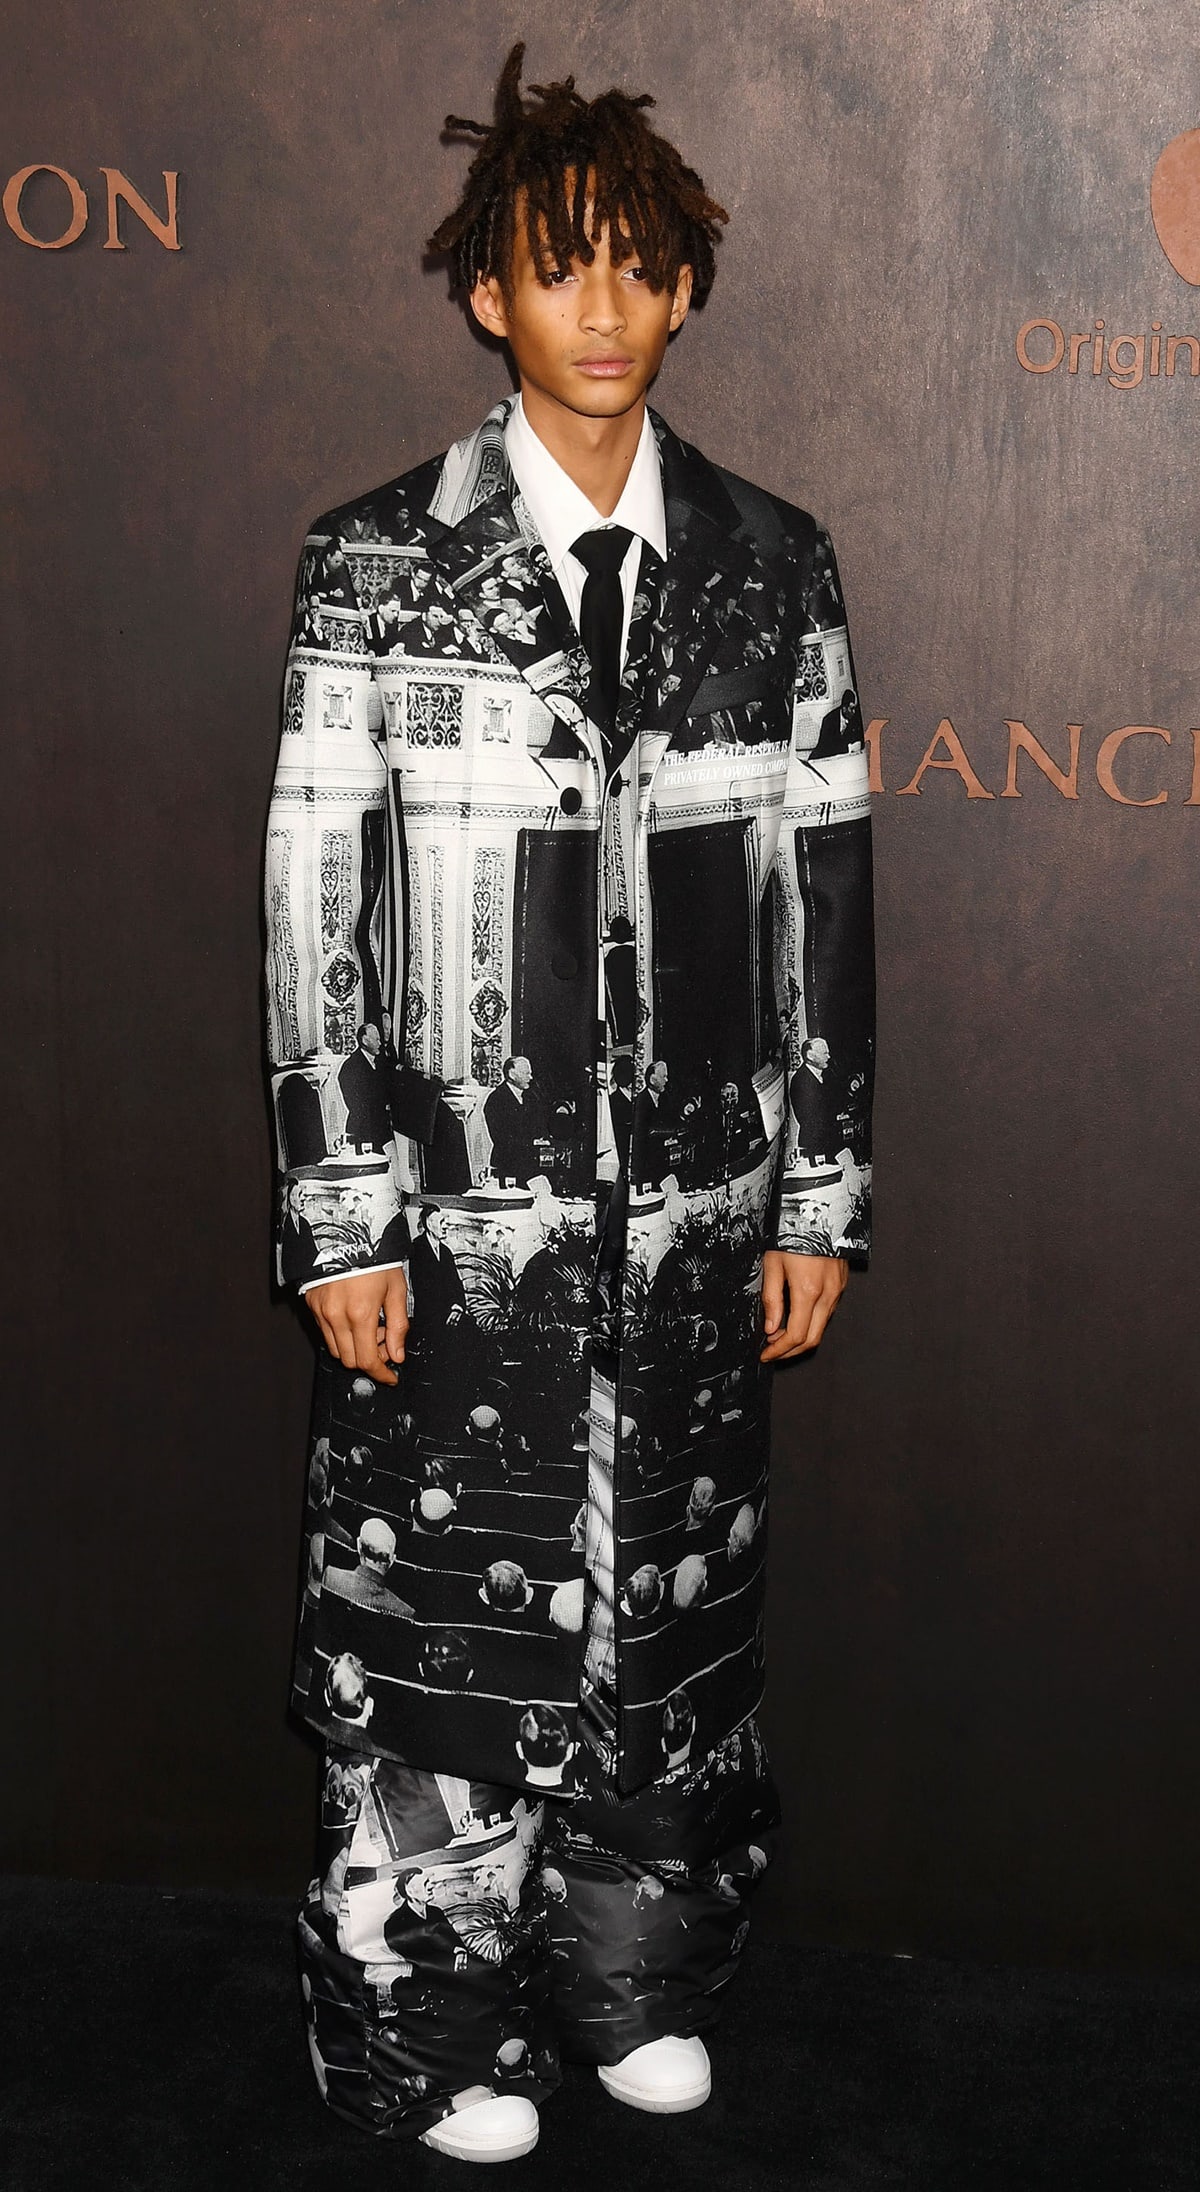 Jaden Smith in an “Anti Federal Reserve Suit” from MSFTSrep, a brand he founded in 2012 alongside actor Moises Arias and musician Daniel D'Artiste